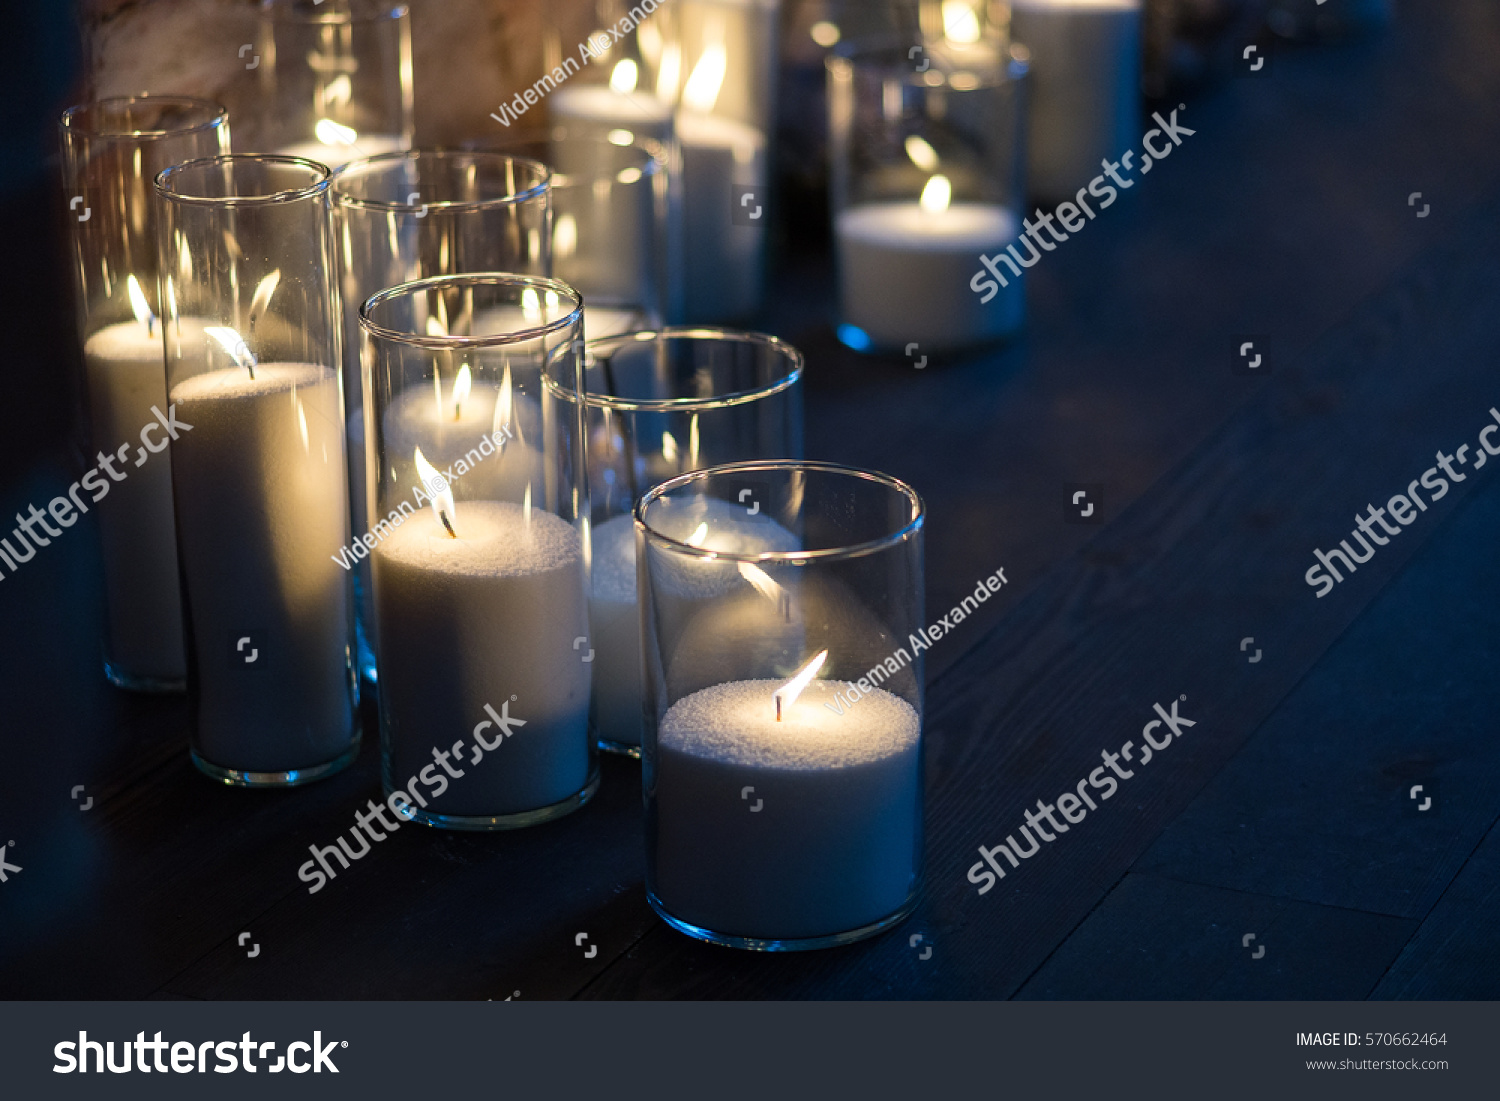 Big White Bulk Candles Standing On Stock Photo Edit Now 570662464